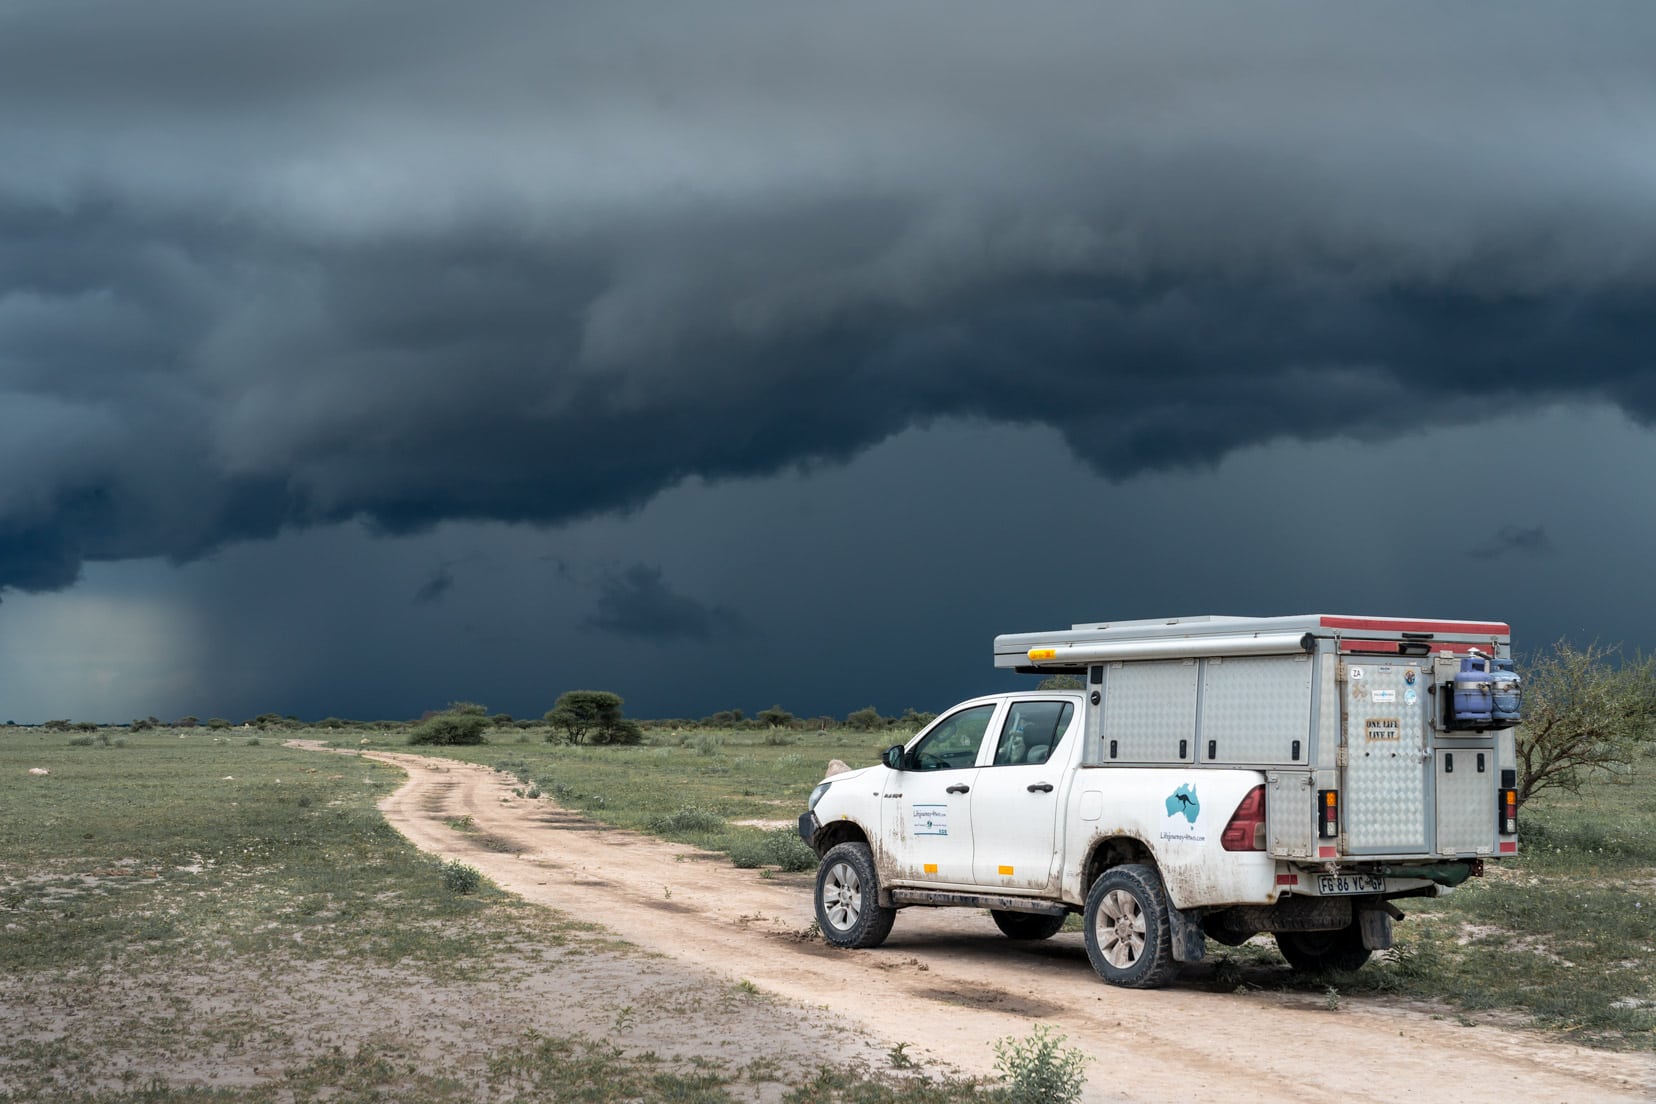 Our Camper on a safari track with black thunderstorm clouds across the sky